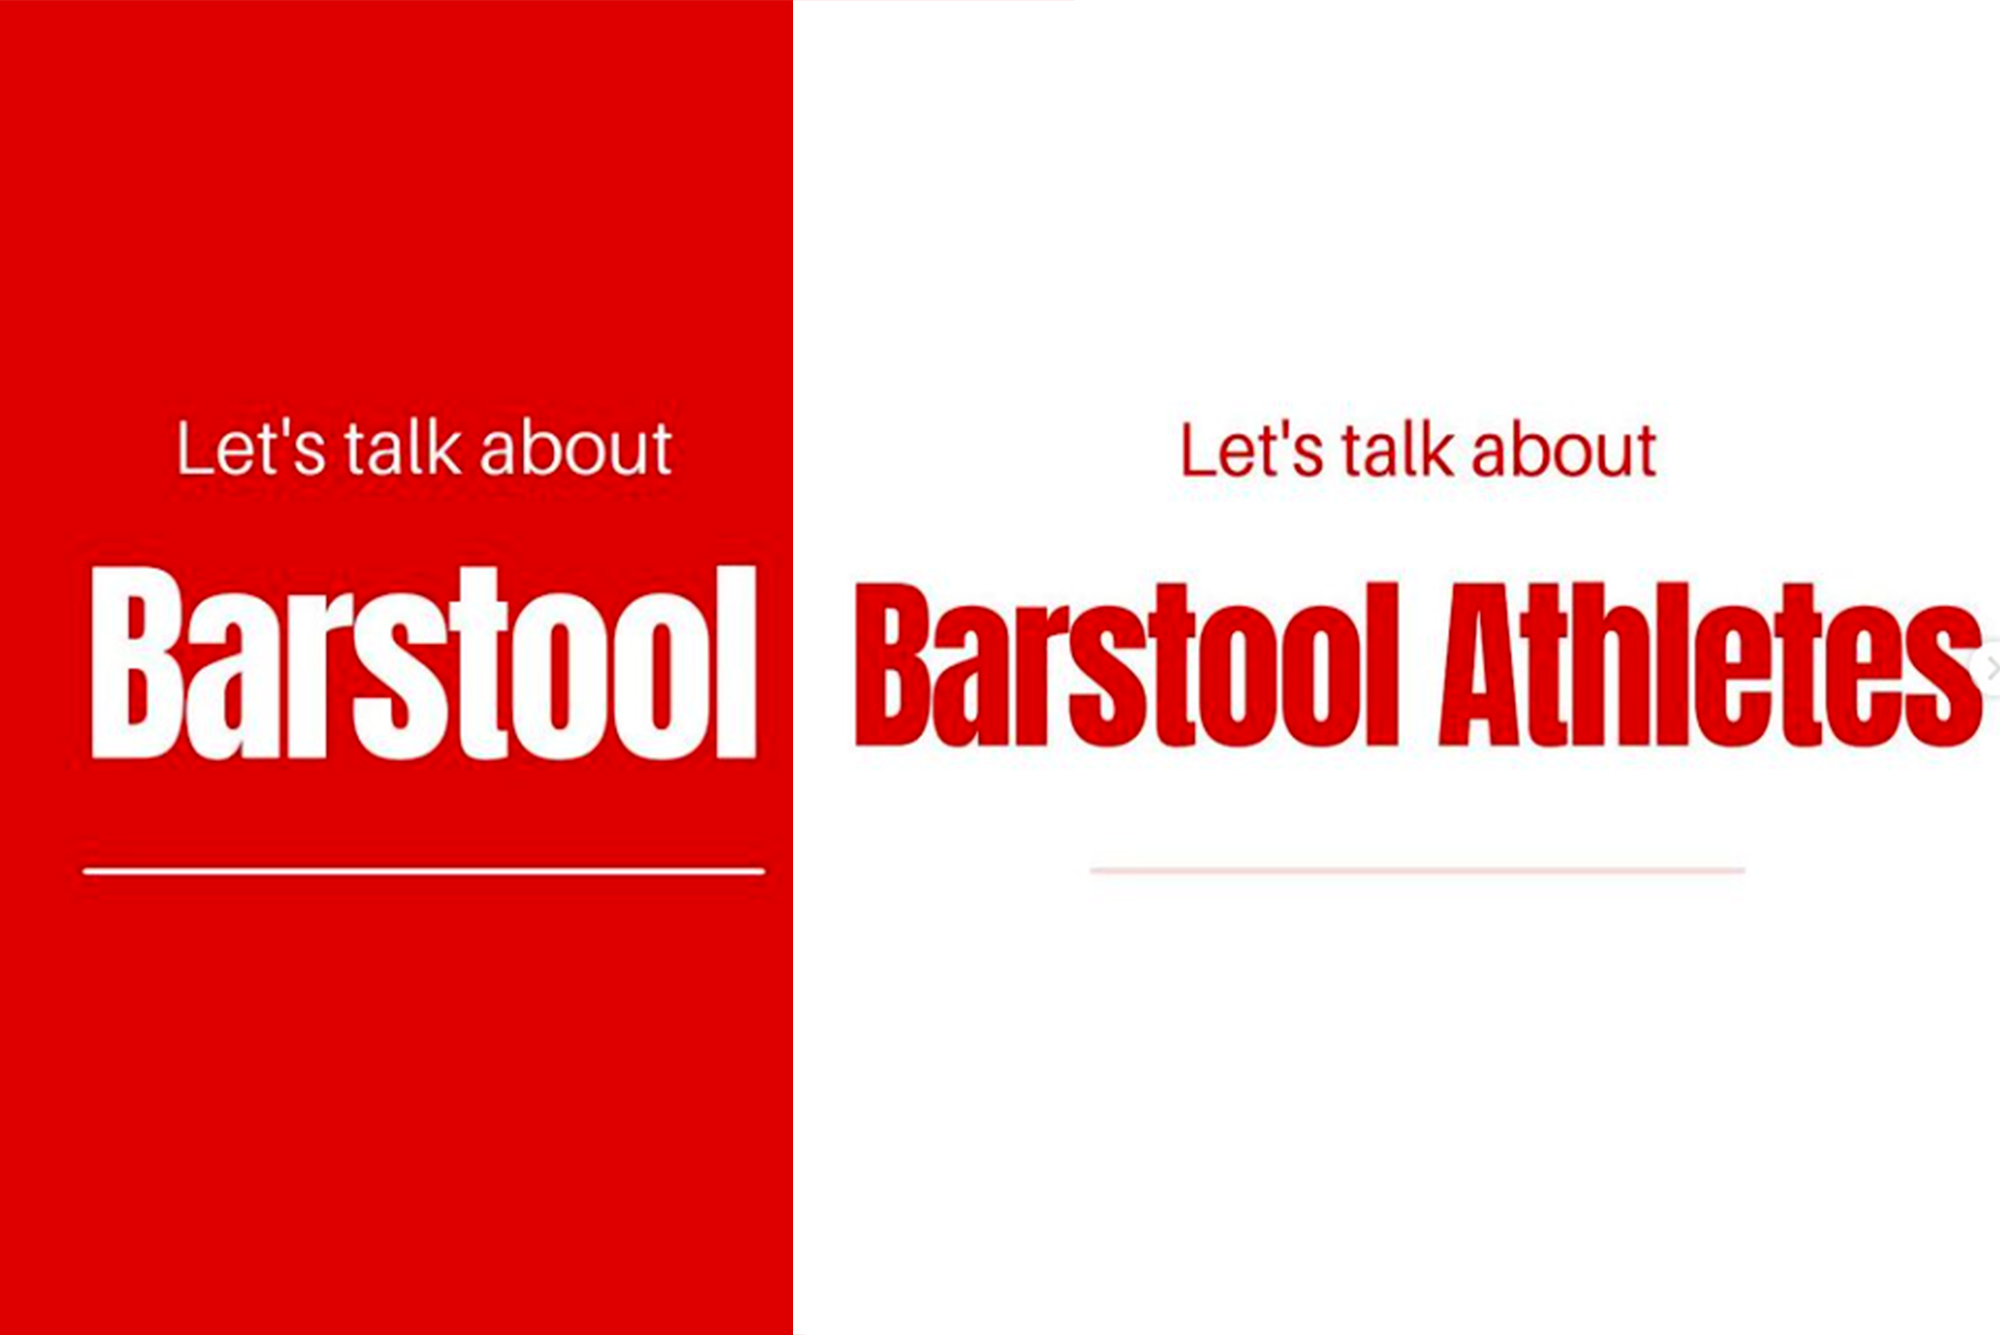 composite image of screenshots from BU's It's On Us Instagram. Words on red background read: "Let's talk about Barstool" and words on white background read "Let's talk about Barstool Athletes"